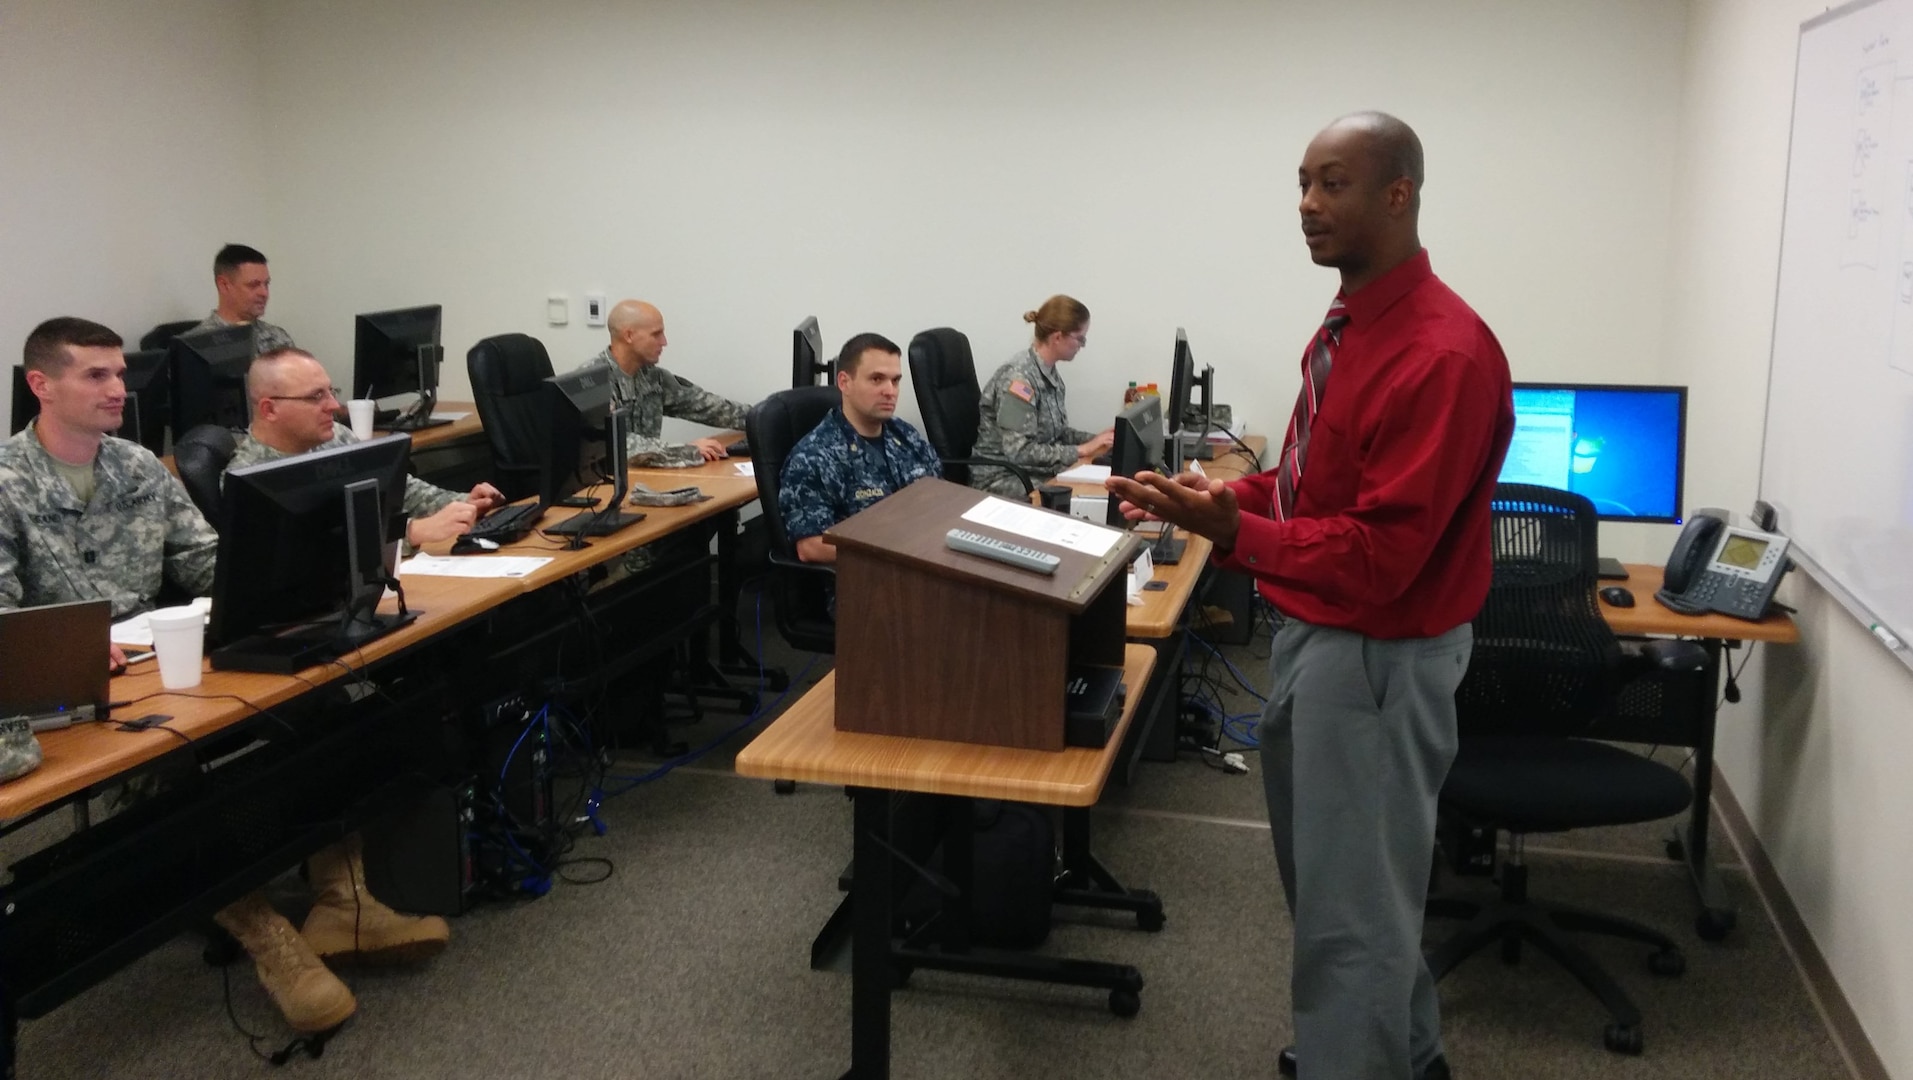 Subjects Matter Experts like Jimmy Colvin, from CECOM, Cyber Training & Sustainment Branch, as well as personnel from the Army Reserve, active Army and Navy, attended the Cyber Common Technical Course to provide feedback in July, 2015, at Camp Robinson, Arkansas.